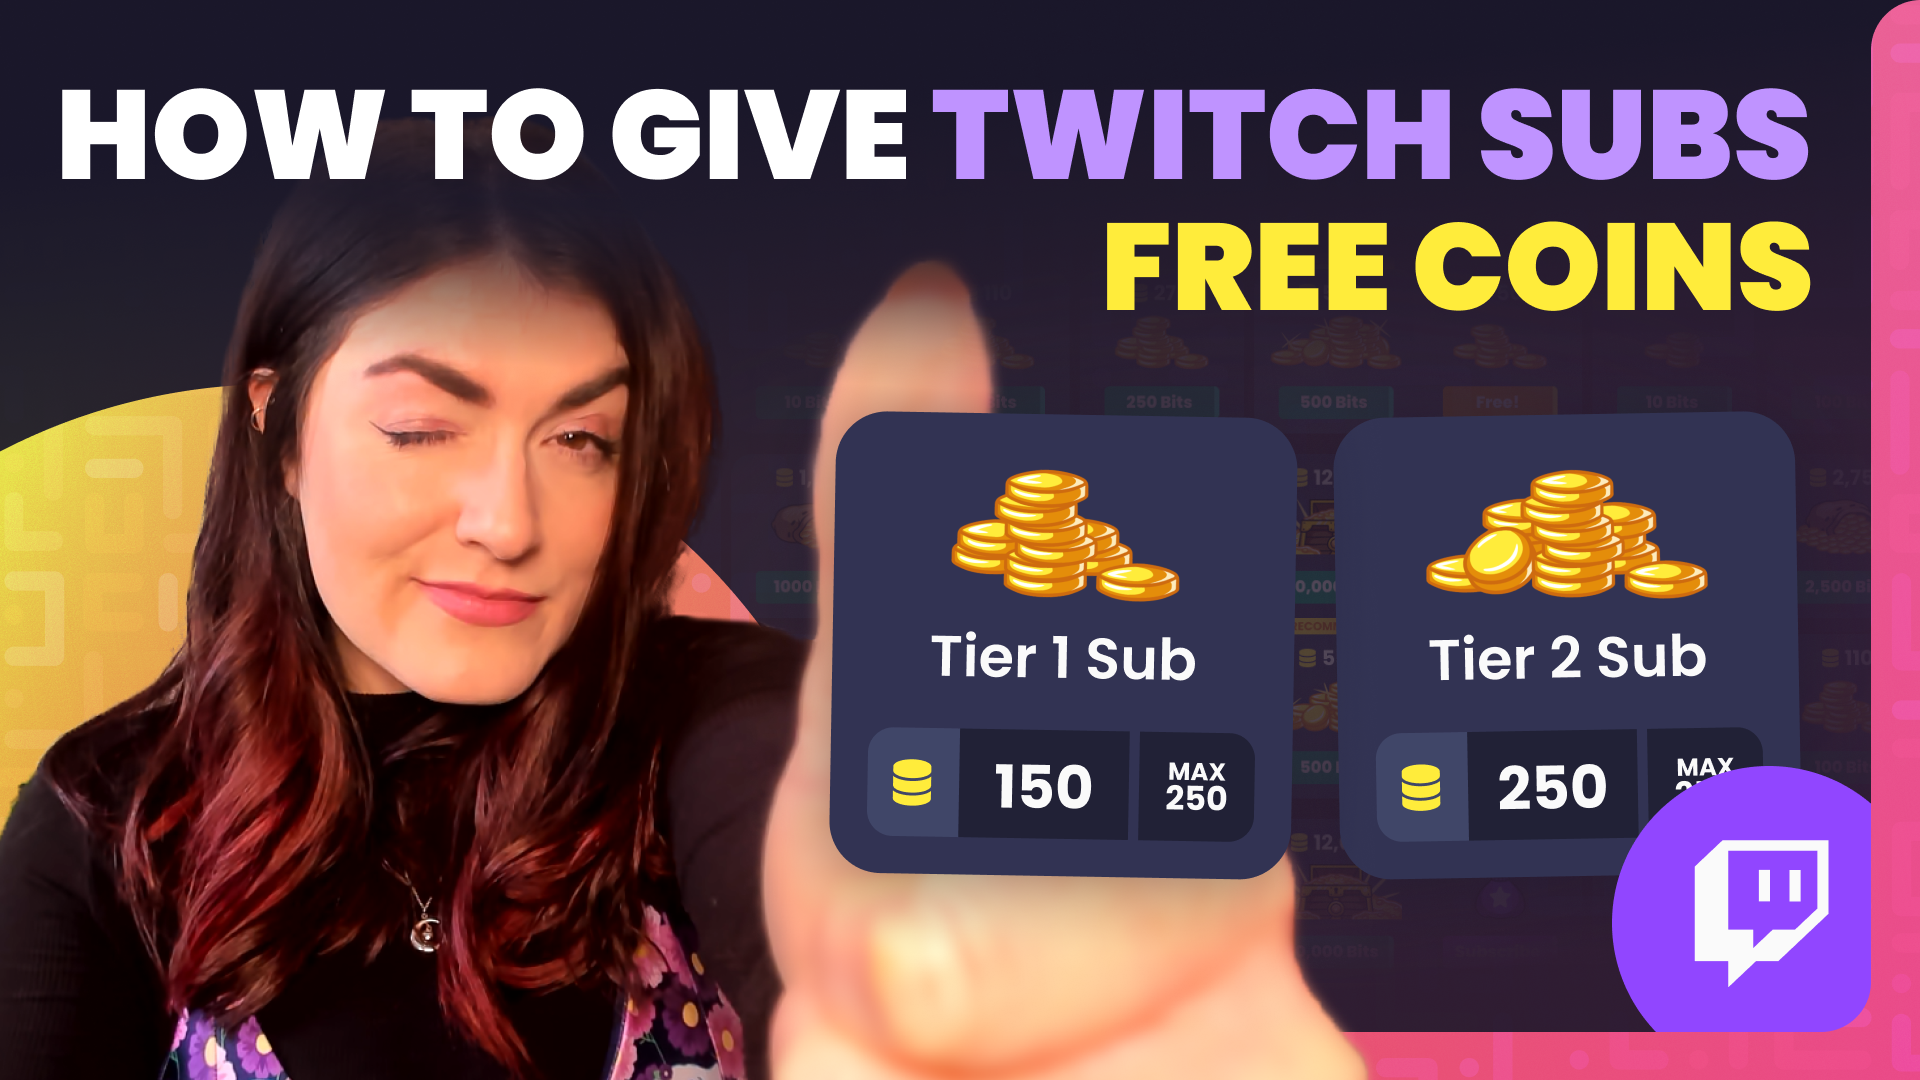 How to Give Free Crowd Control Coins To Your Twitch Subscribers